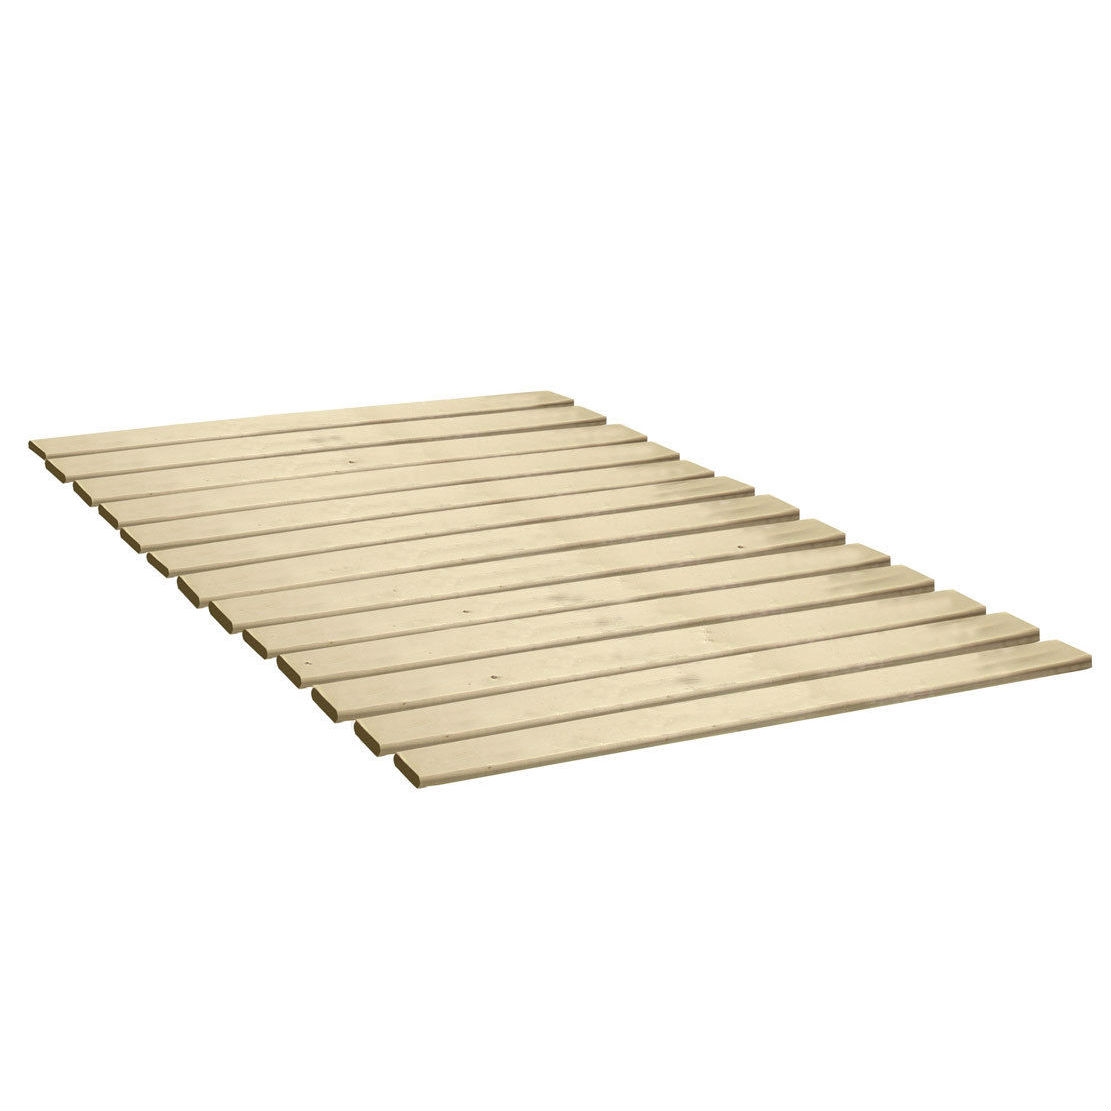 King size Solid Wood Bed Slats - Made in USA | FastFurnishings.com